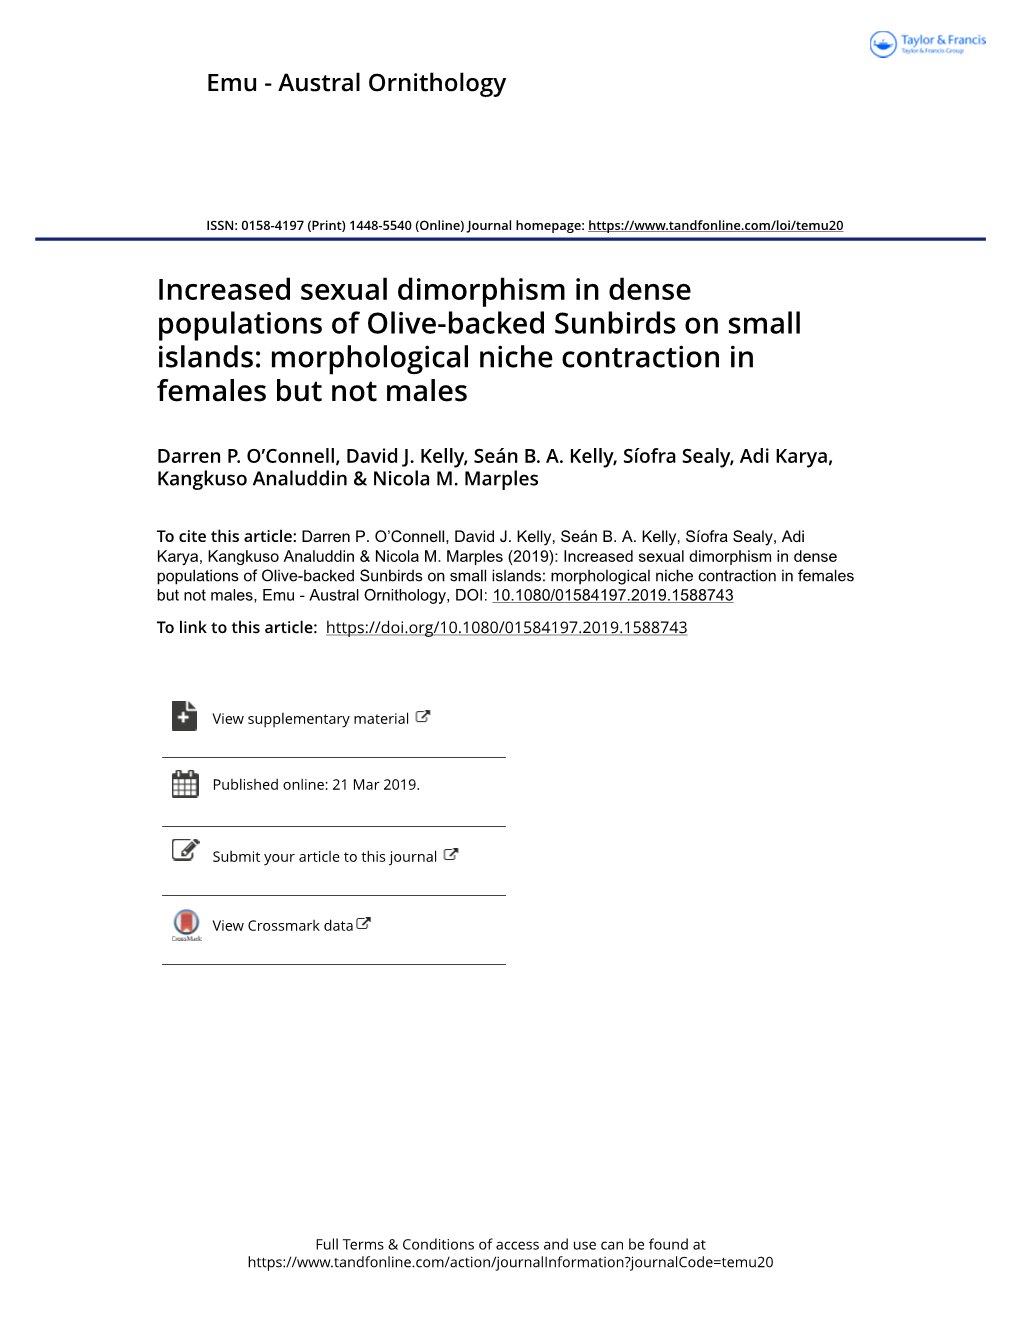 Increased Sexual Dimorphism in Dense Populations of Olive-Backed Sunbirds on Small Islands: Morphological Niche Contraction in Females but Not Males